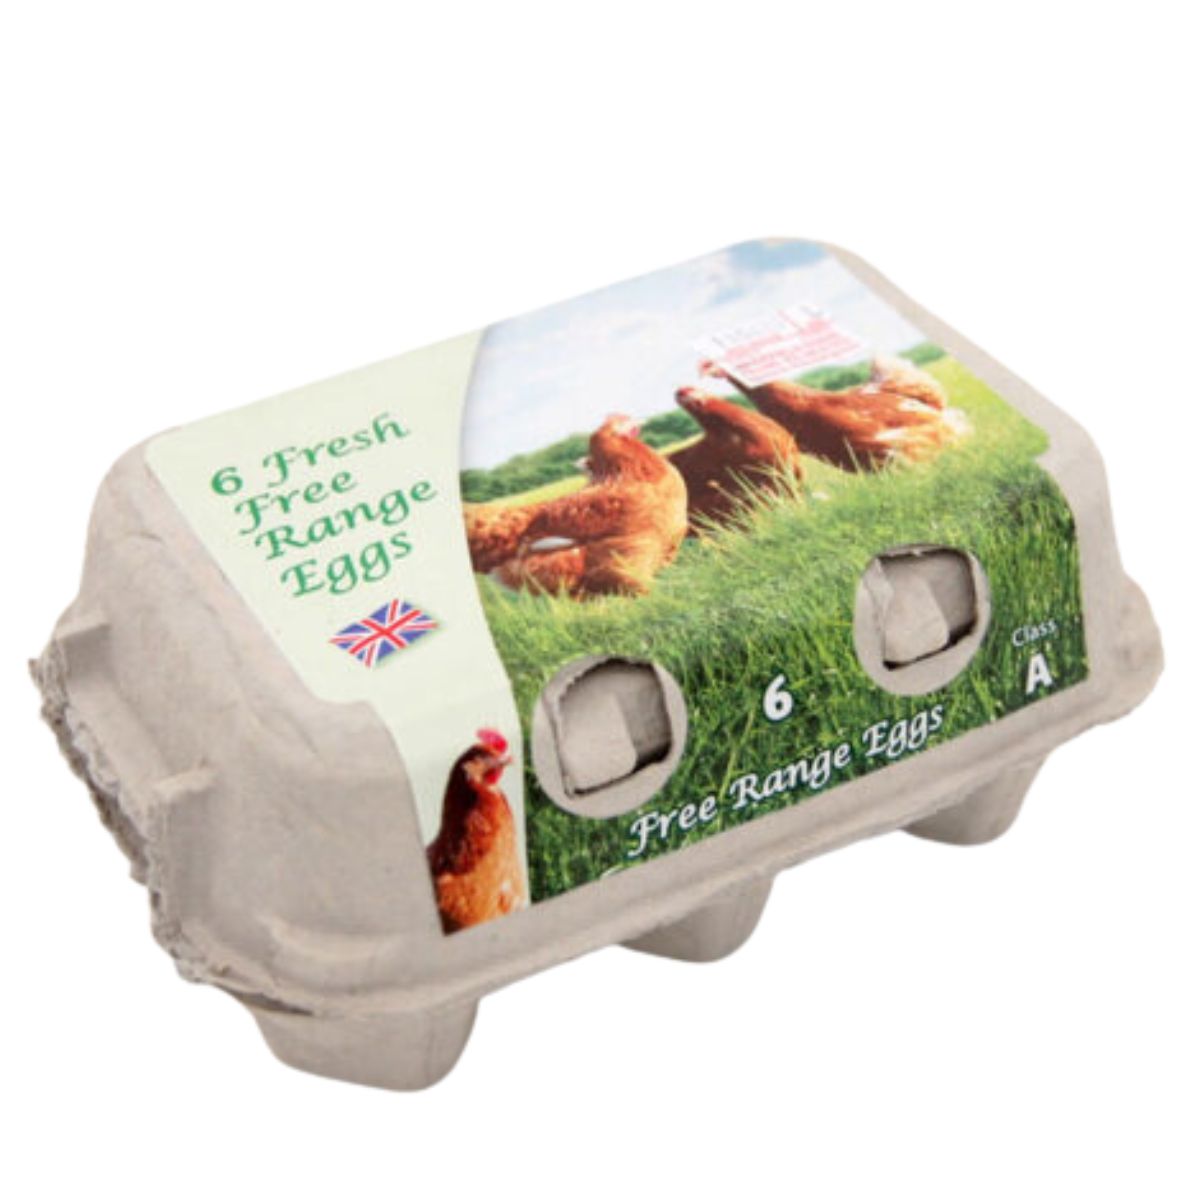 A carton of CFS - Large Free Range Eggs - 6 Pack on a white background.